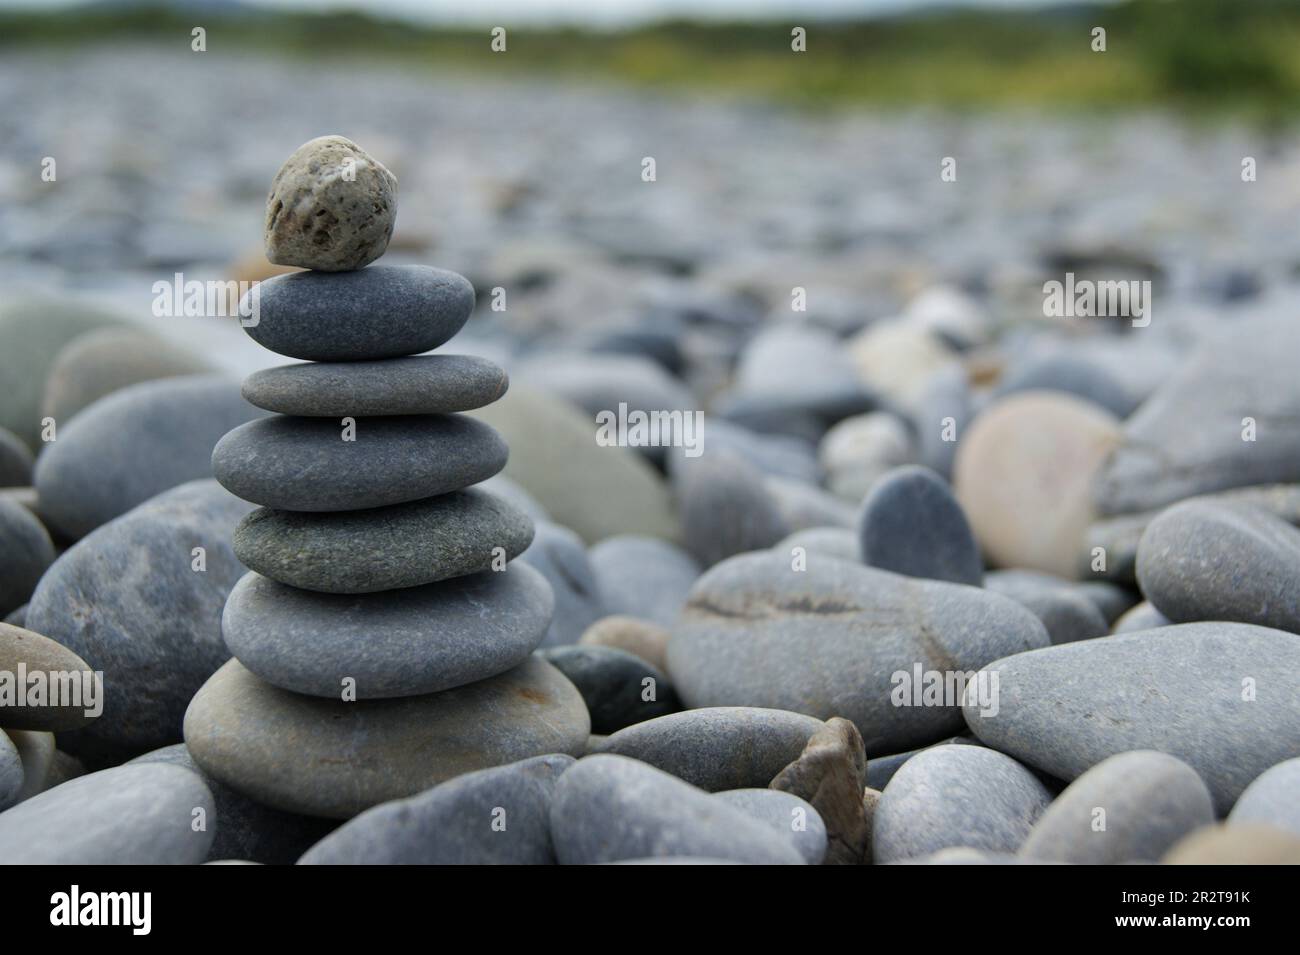 Zen towers on a stony beach. Towers made of pebbles. Stock Photo